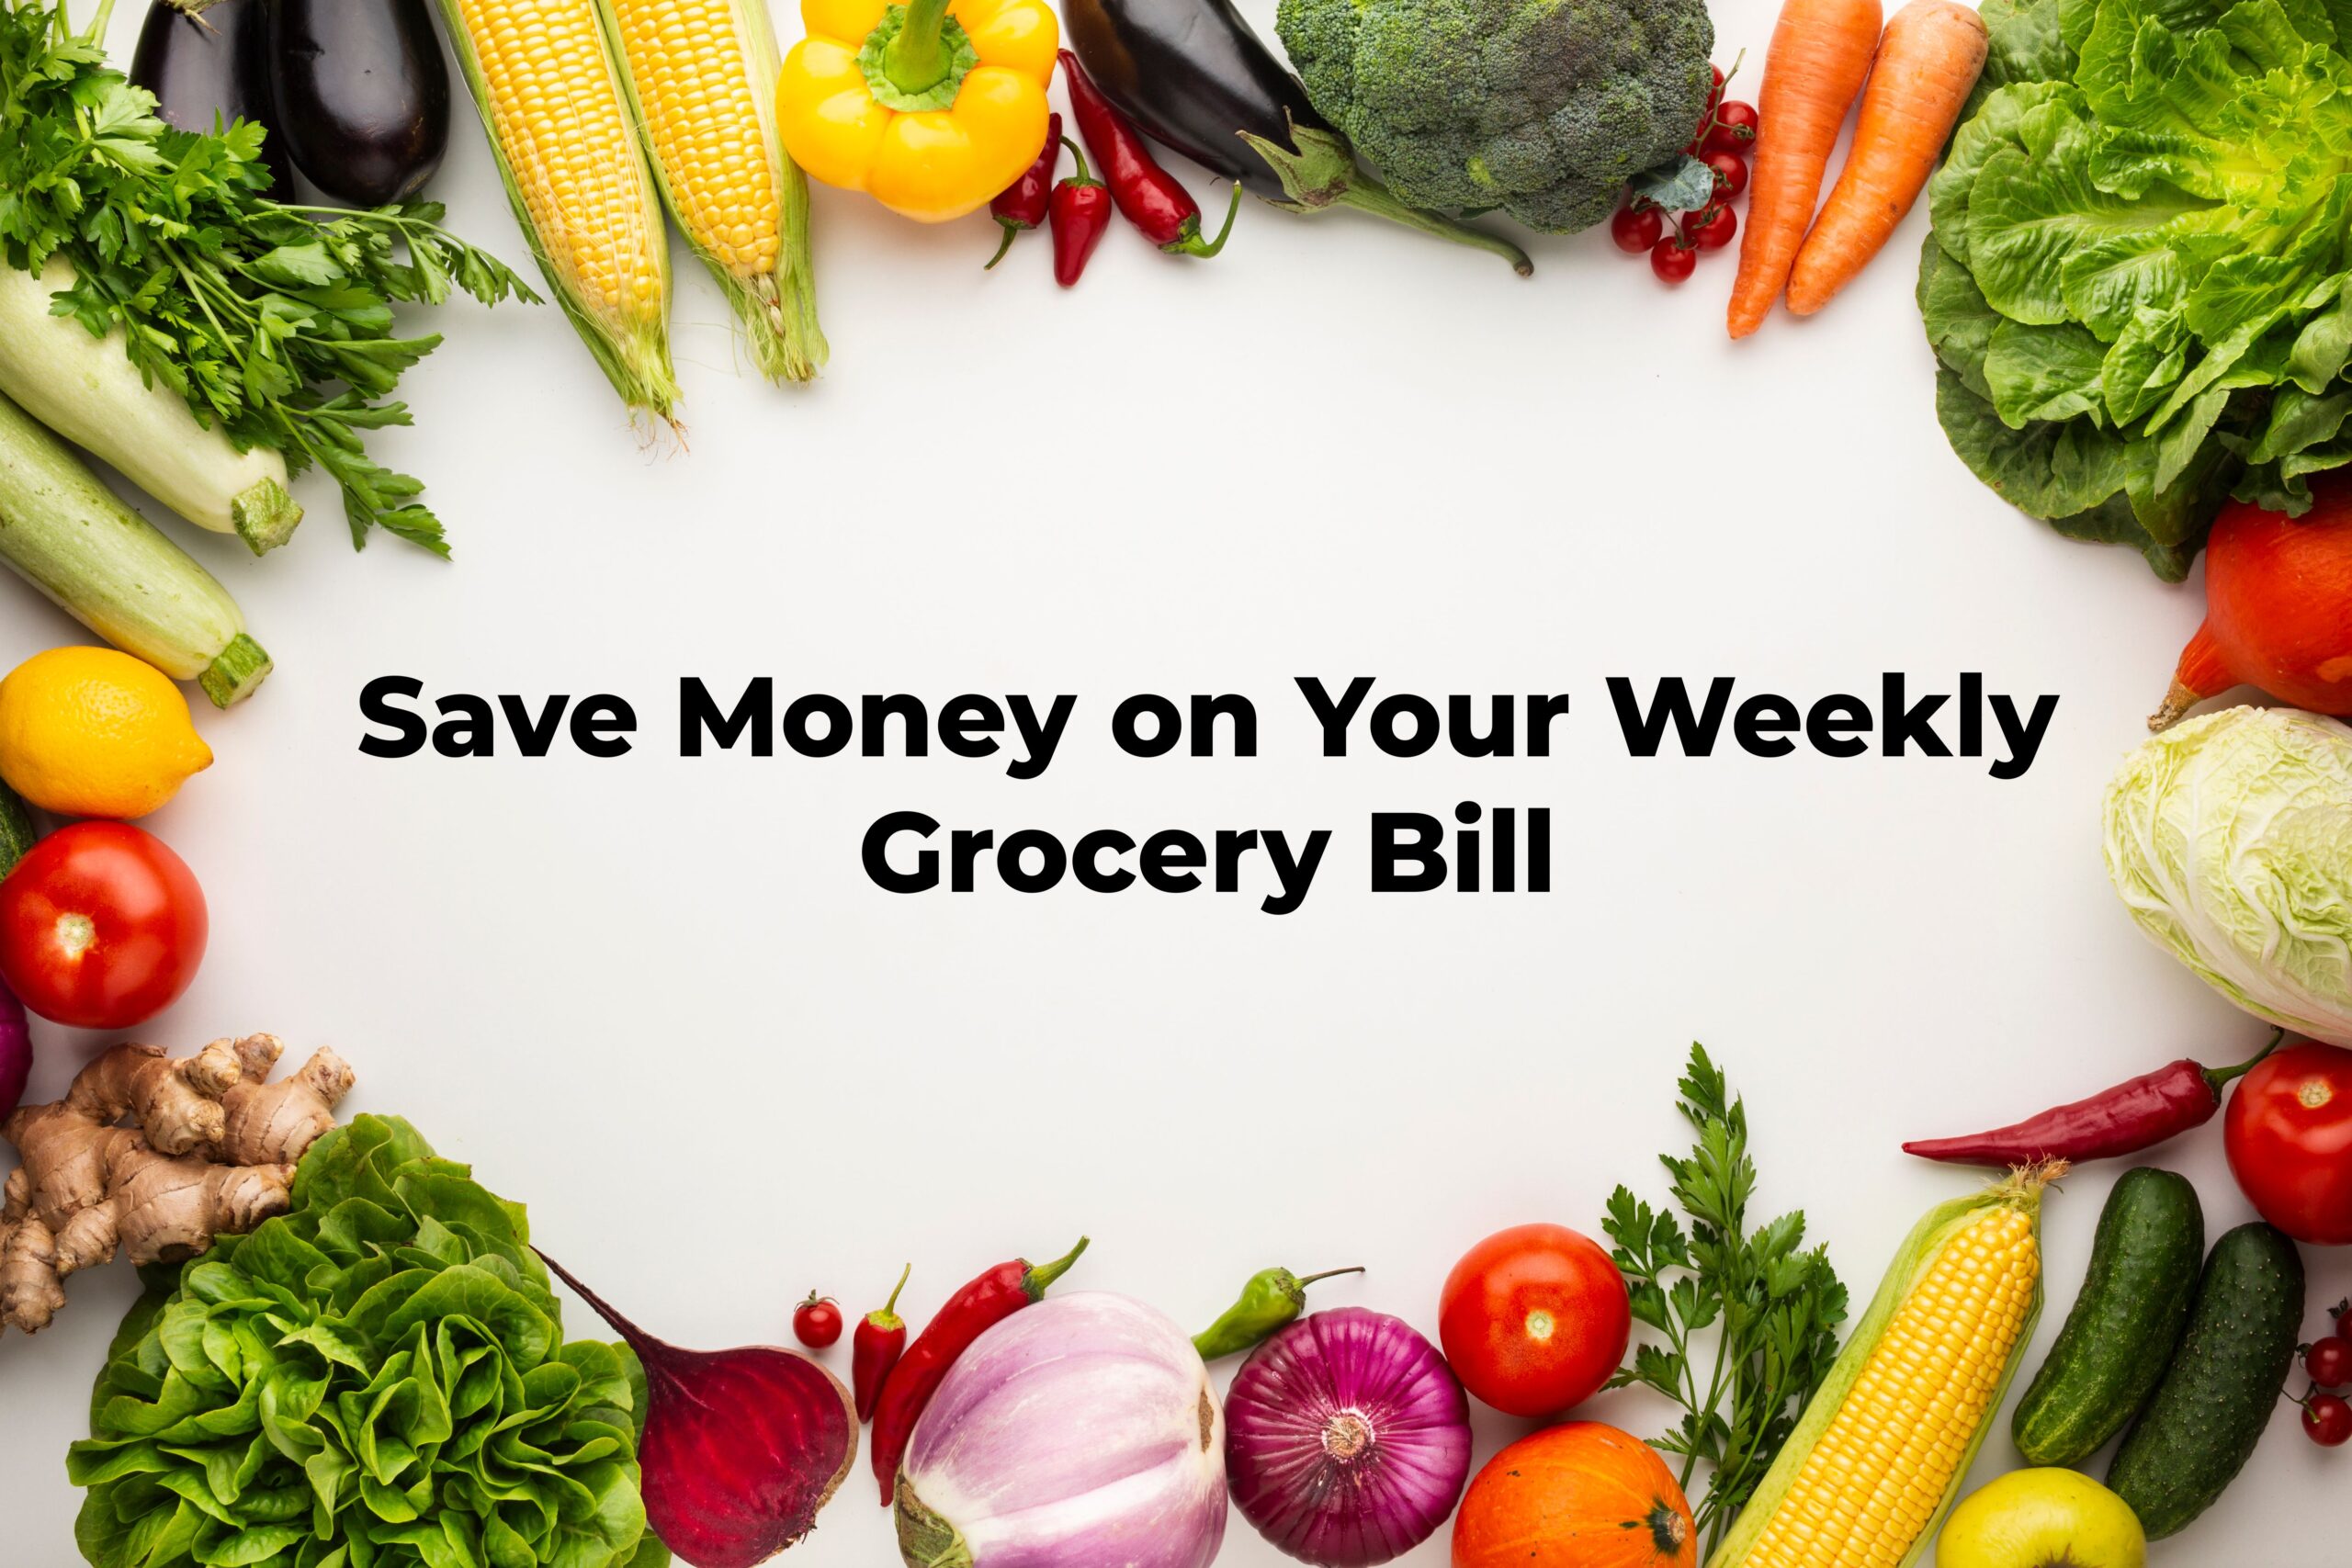 Save Money on Your Weekly Grocery Bill